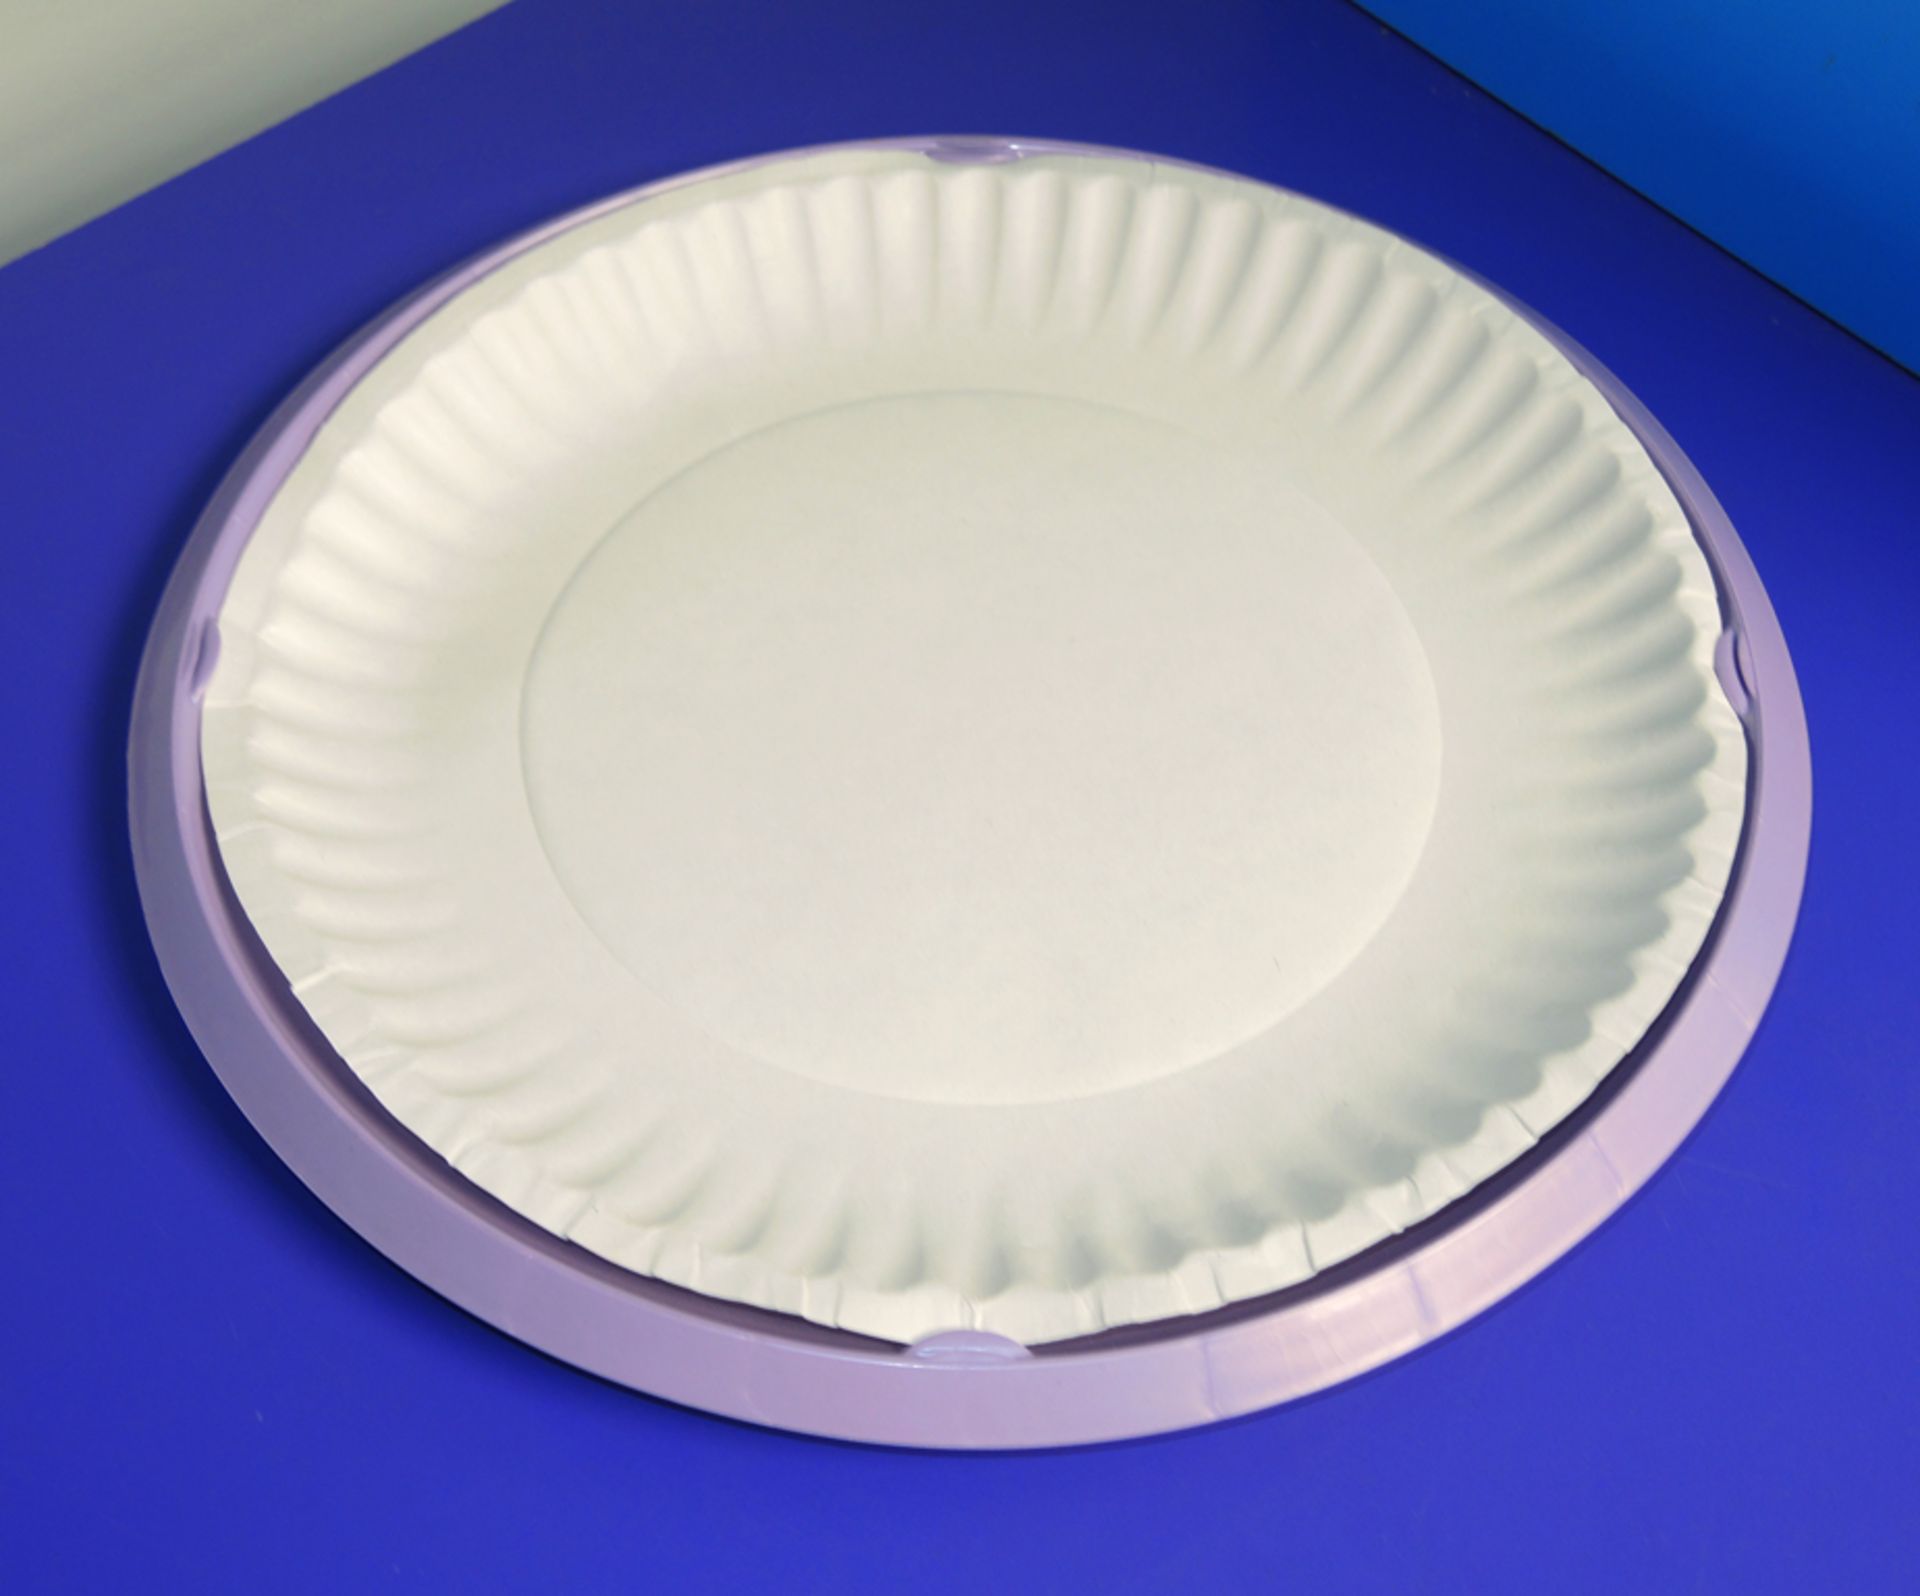 Paper Plate Holder Mold - Image 11 of 11